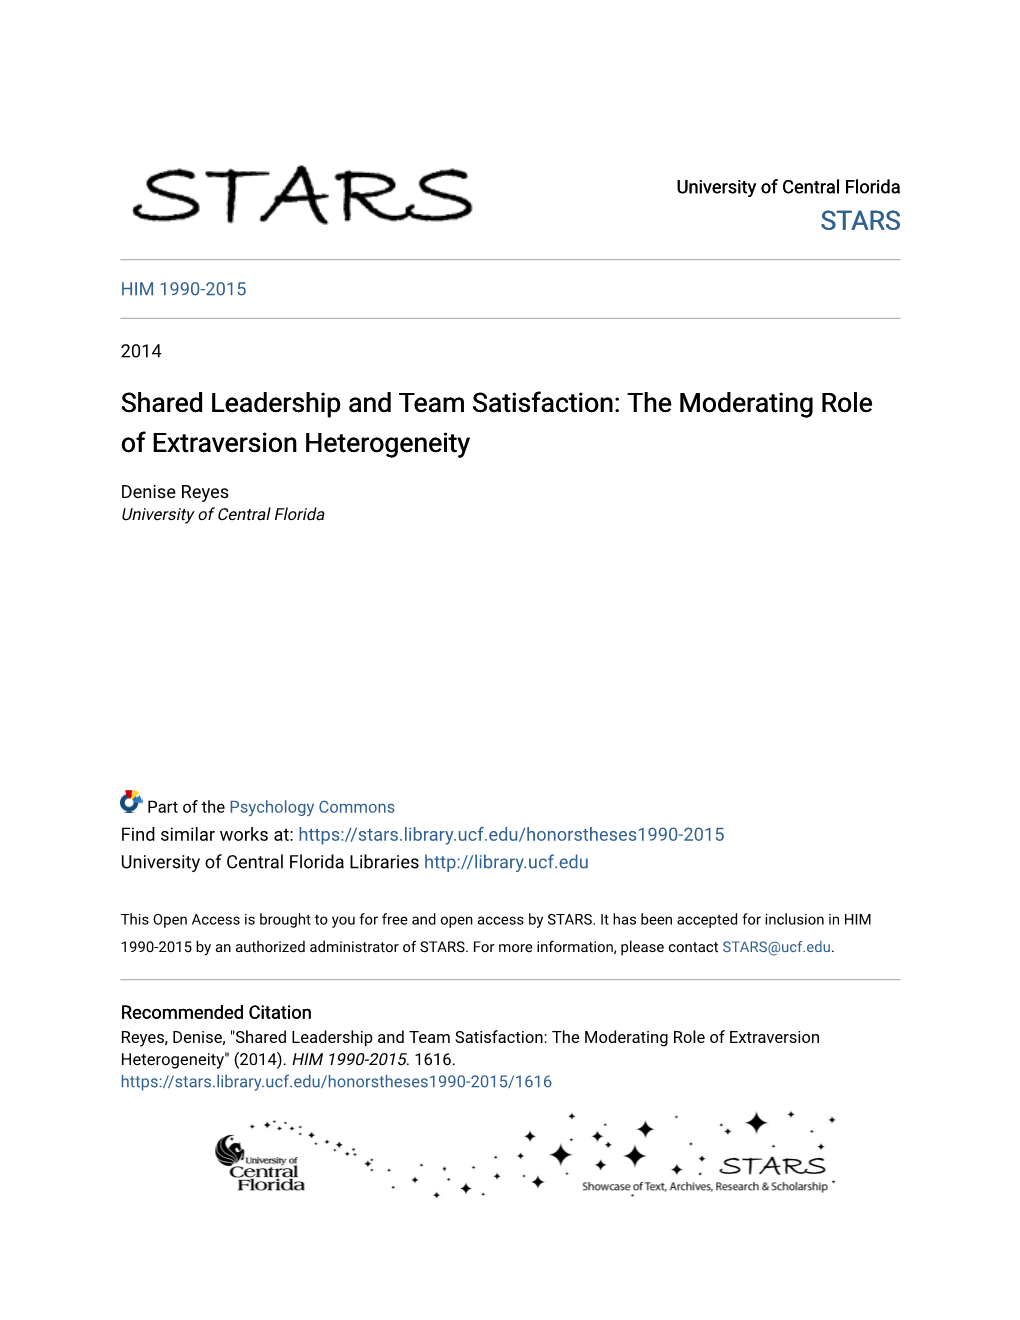 Shared Leadership and Team Satisfaction: the Moderating Role of Extraversion Heterogeneity